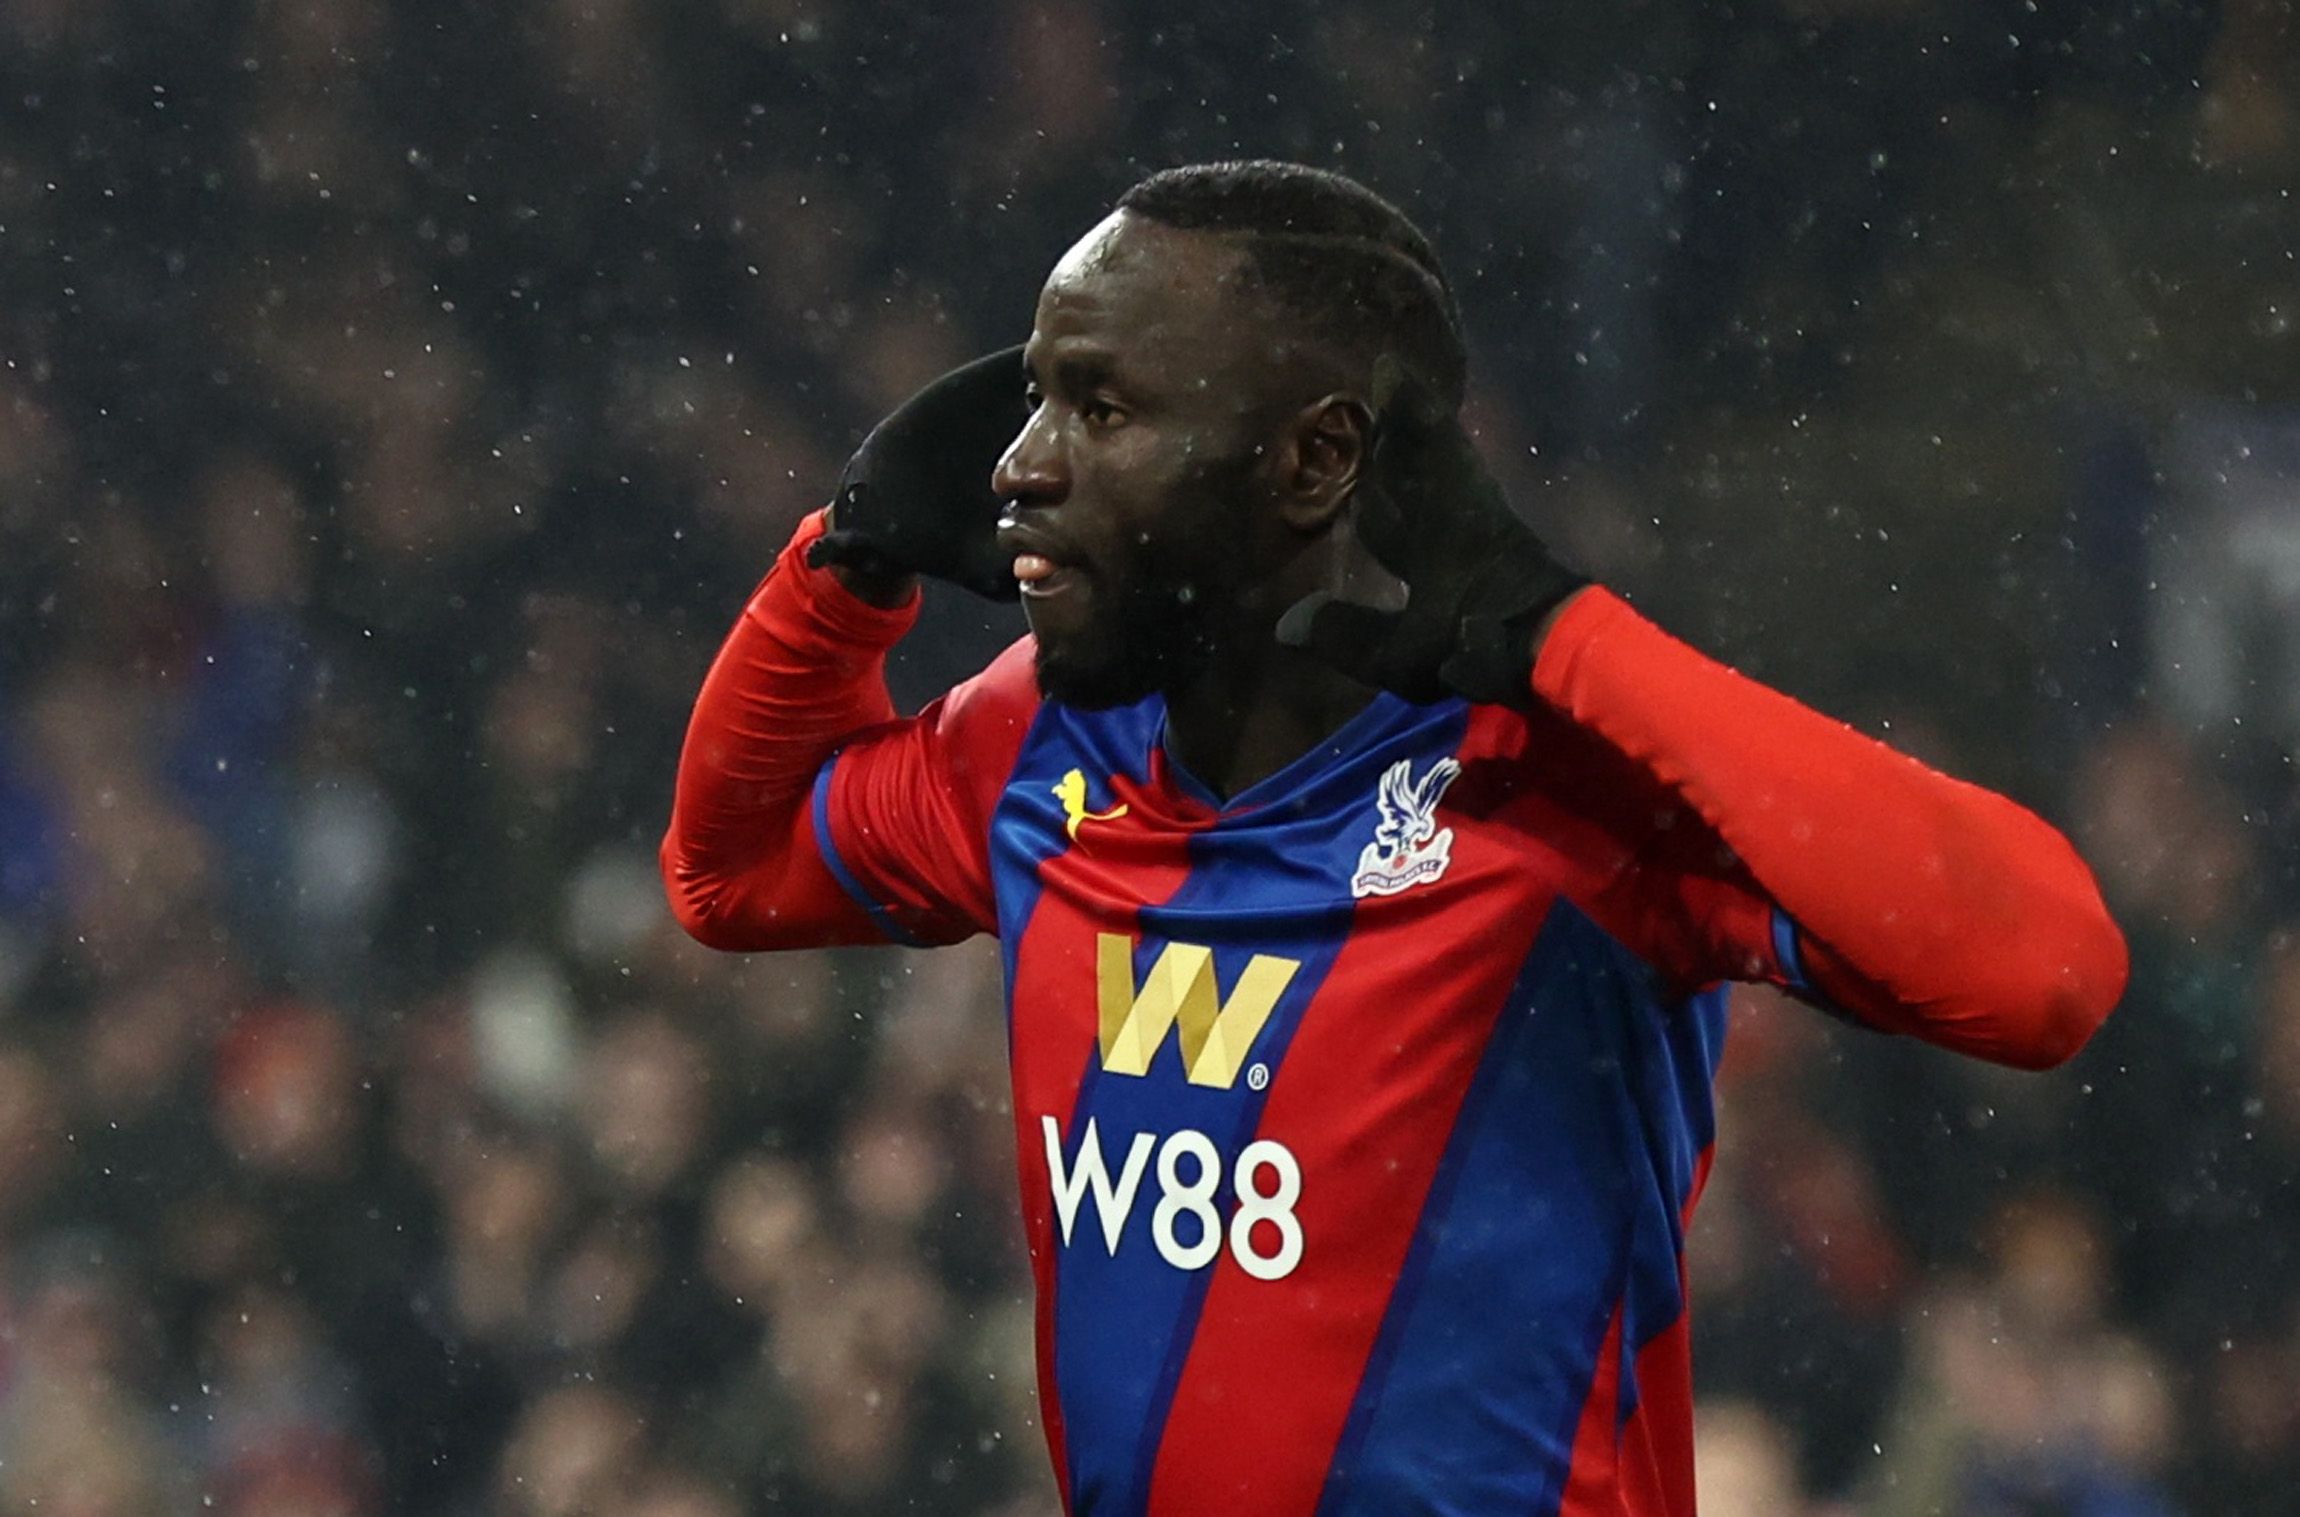 Soccer Football - FA Cup Fifth Round - Crystal Palace v Stoke City - Selhurst Park, London, Britain - March 1, 2022 Crystal Palace's Cheikhou Kouyate celebrates scoring their first goal REUTERS/David Klein